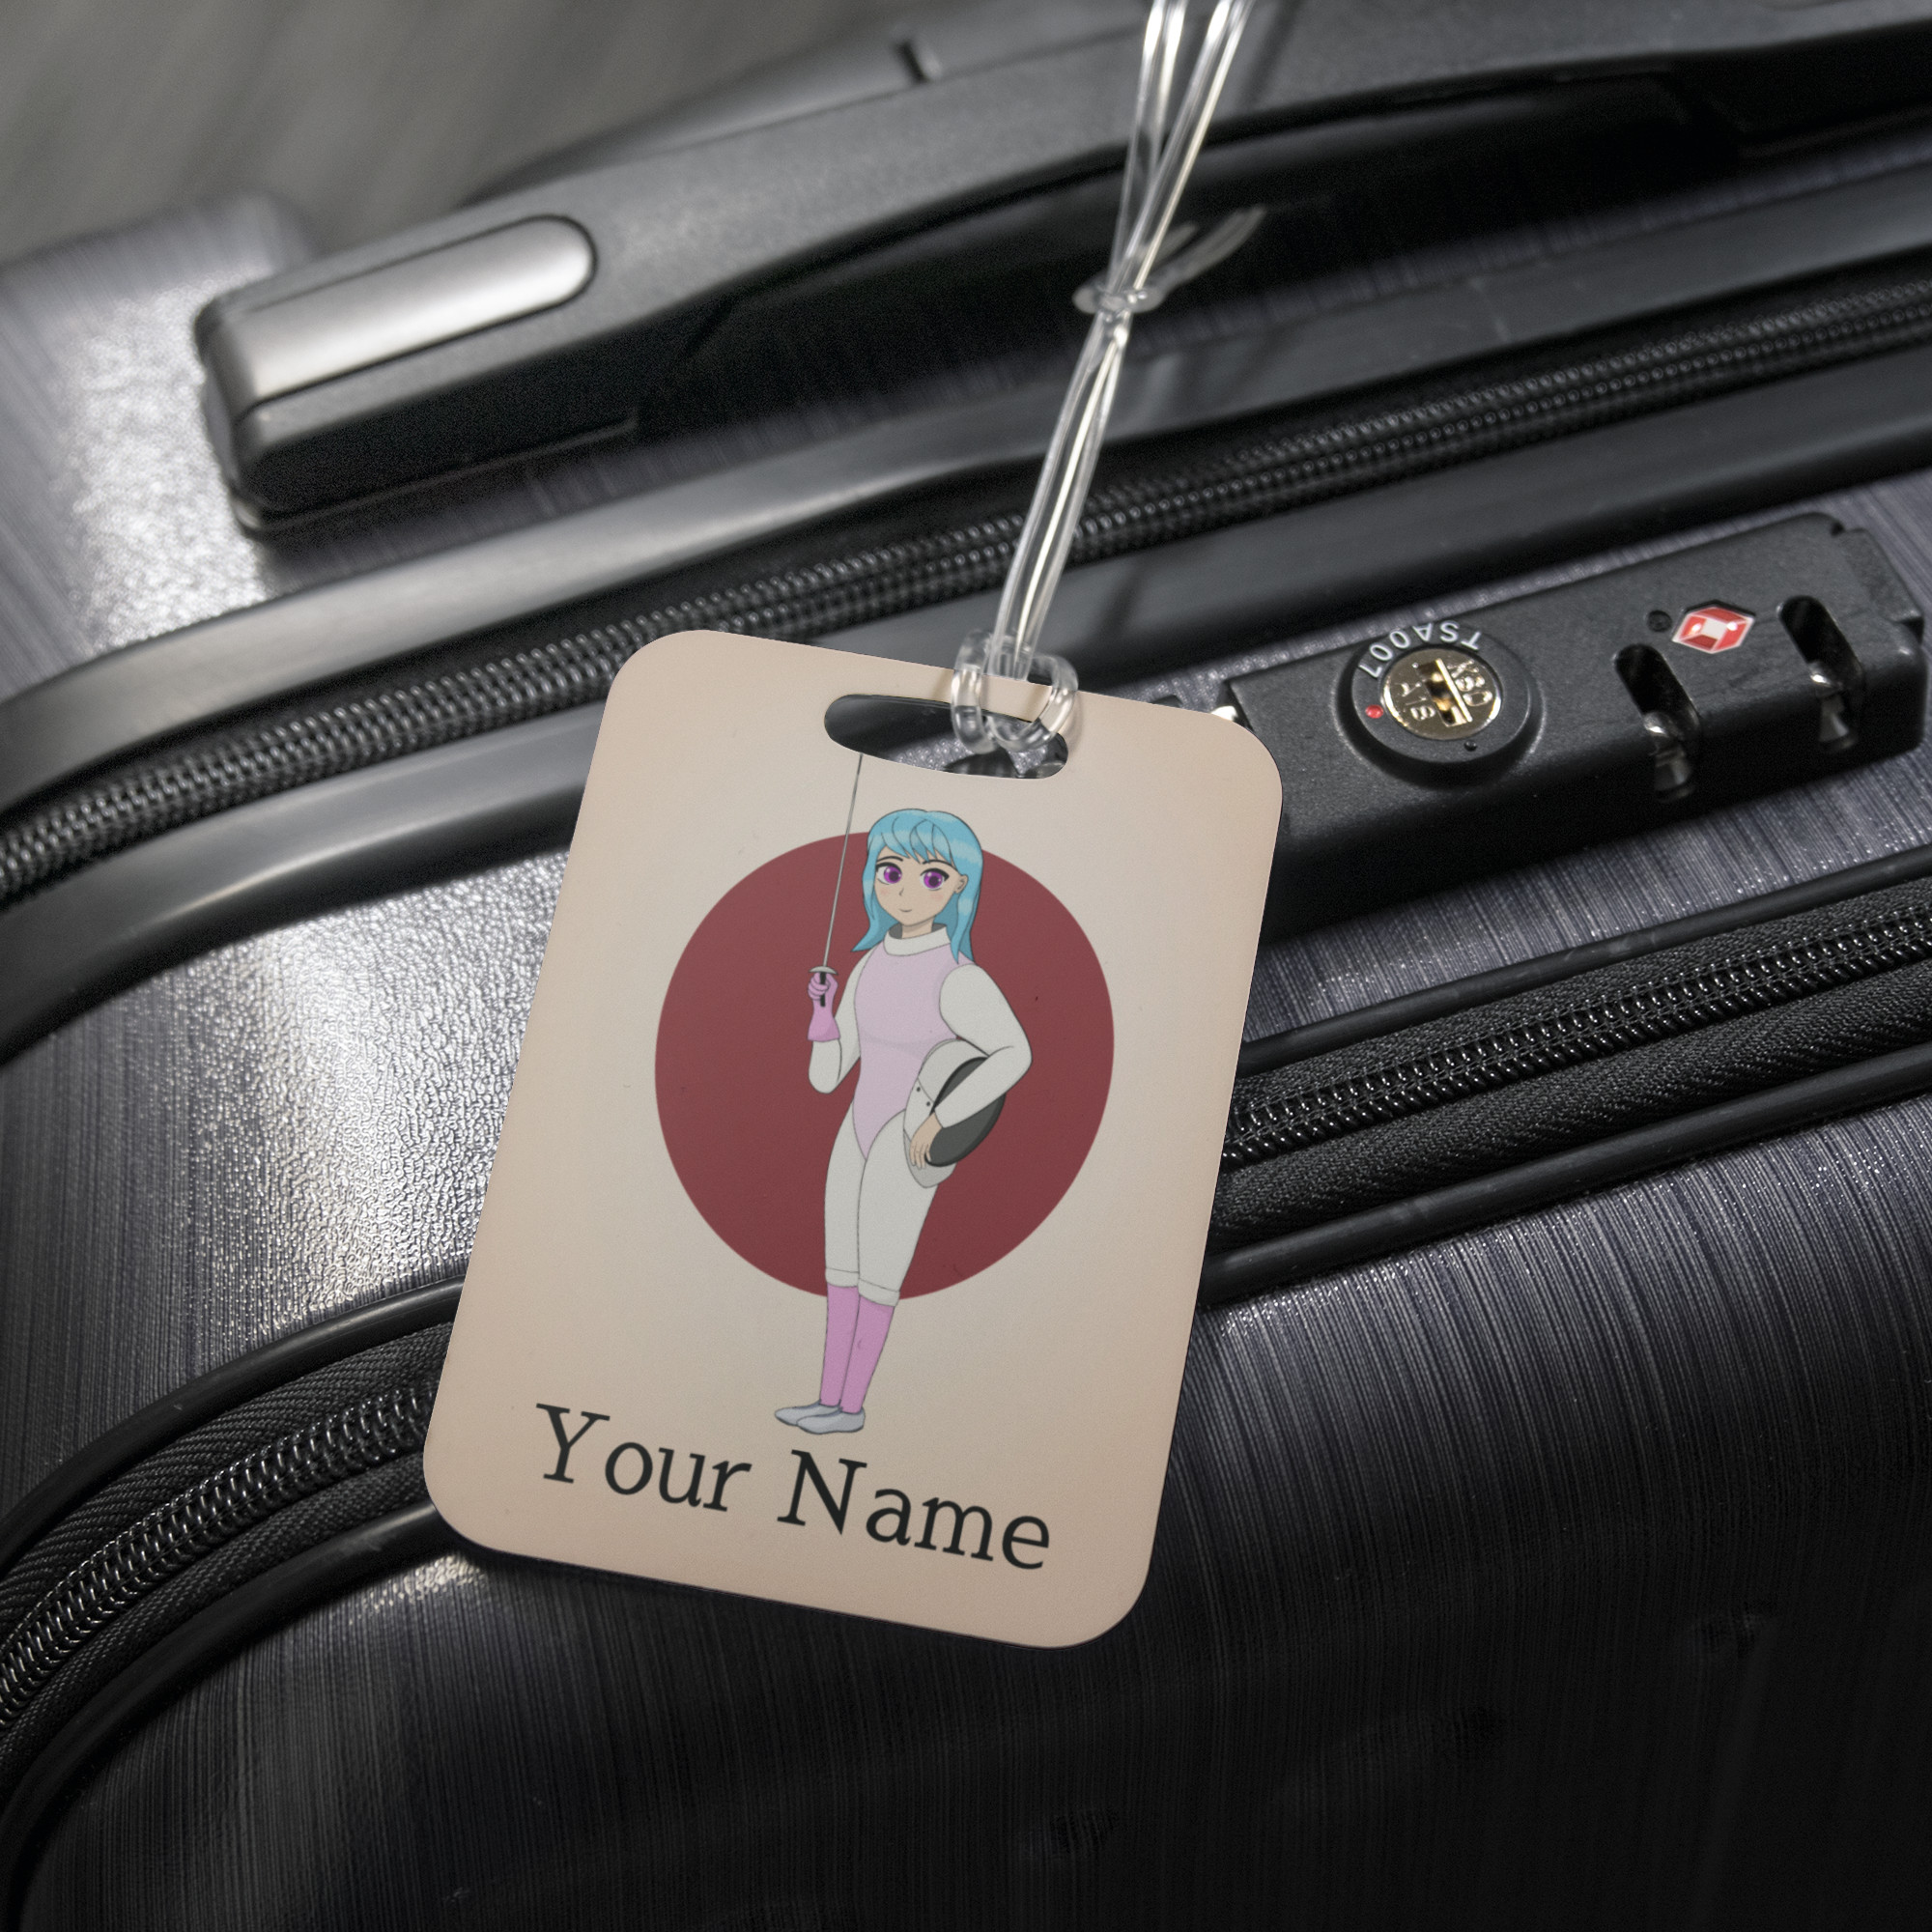 https://www.fencinglove.com/wp-content/uploads/2022/01/anime-fencing-girl-luggage-tag-suitcase.jpg